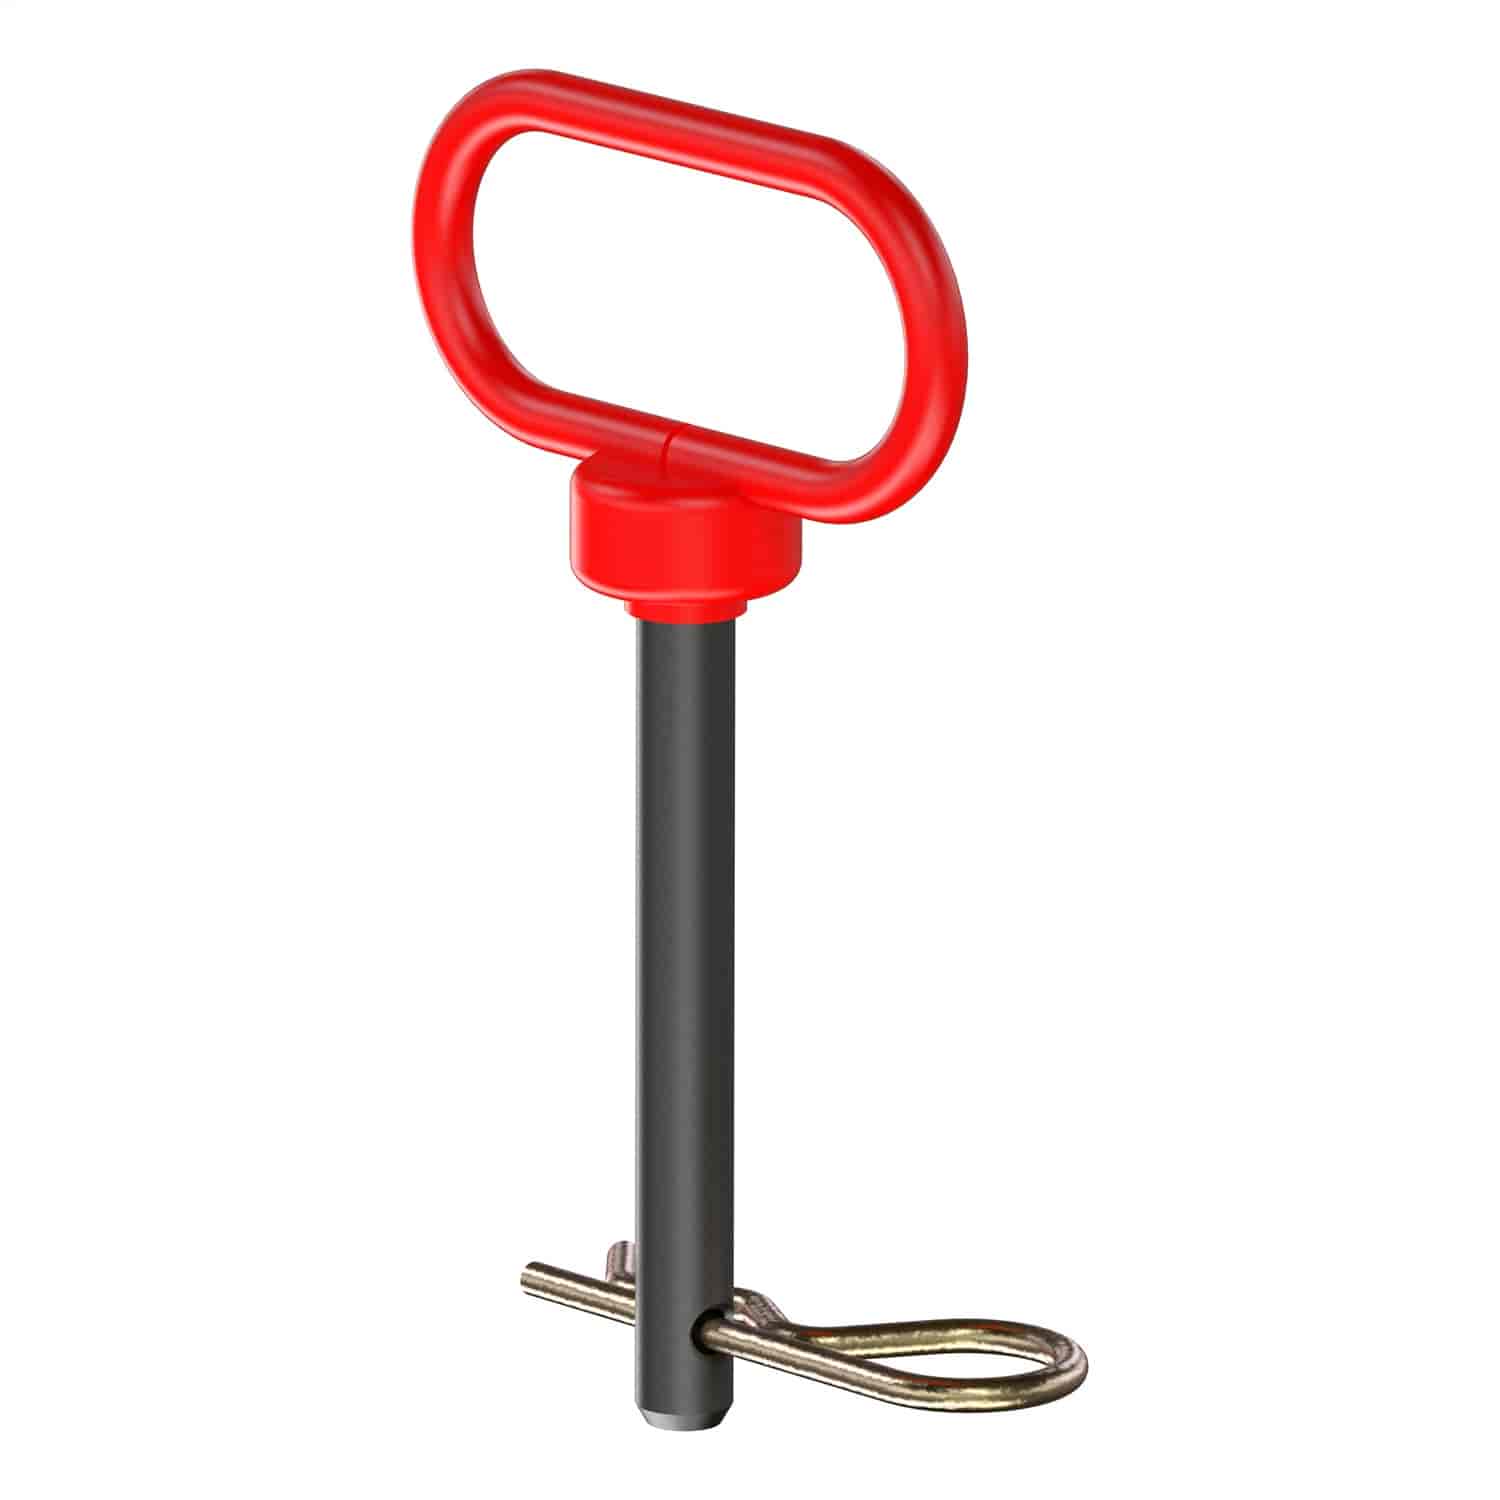 1/2" CLEVIS PIN